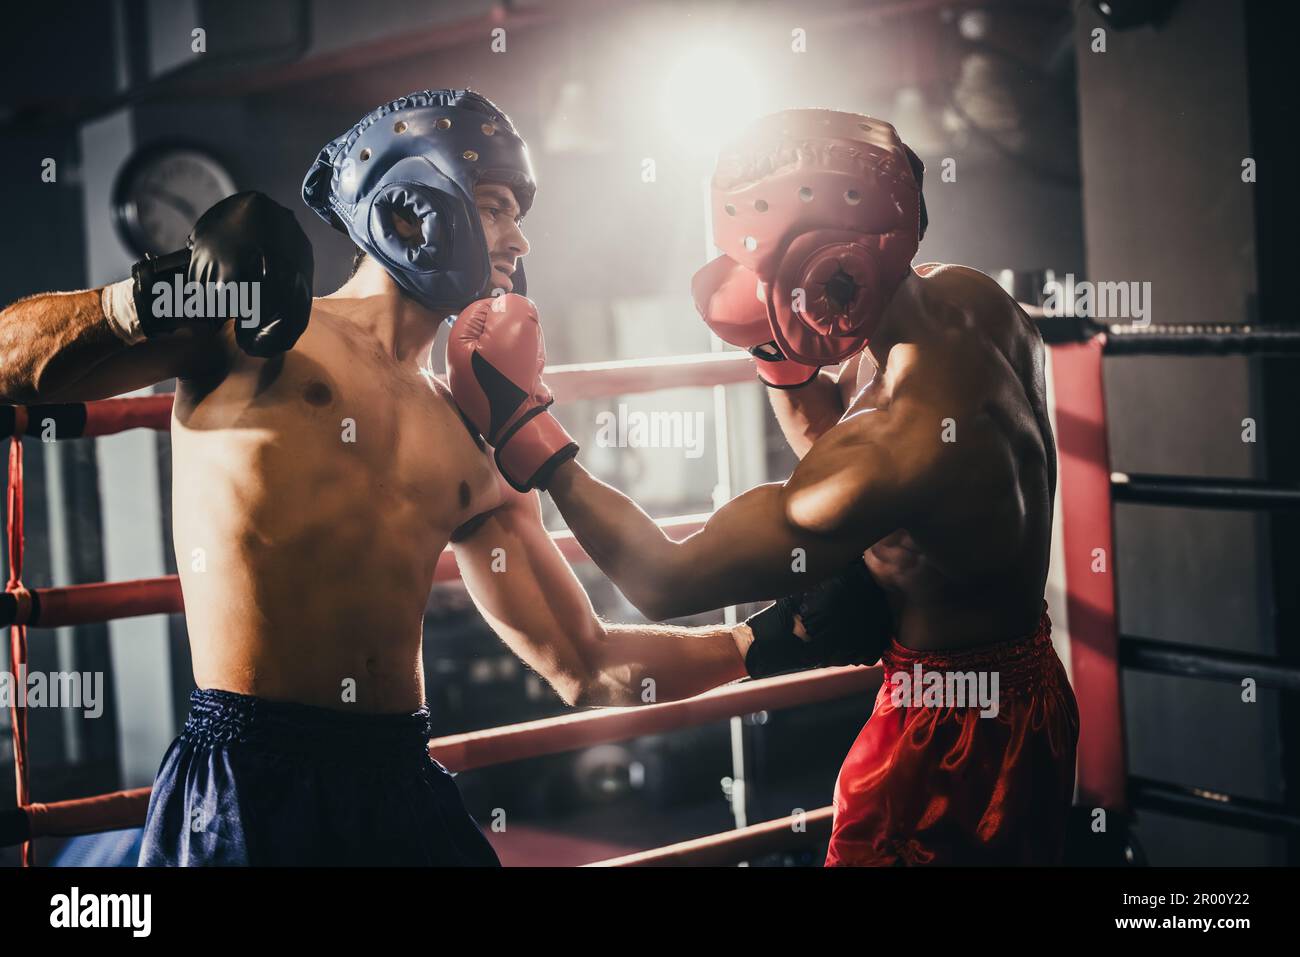 https://c8.alamy.com/comp/2R00Y22/boxer-use-various-punch-combinations-including-the-jab-hook-uppercut-cross-swing-straight-getting-in-close-to-make-opponent-on-ropes-and-knocko-2R00Y22.jpg